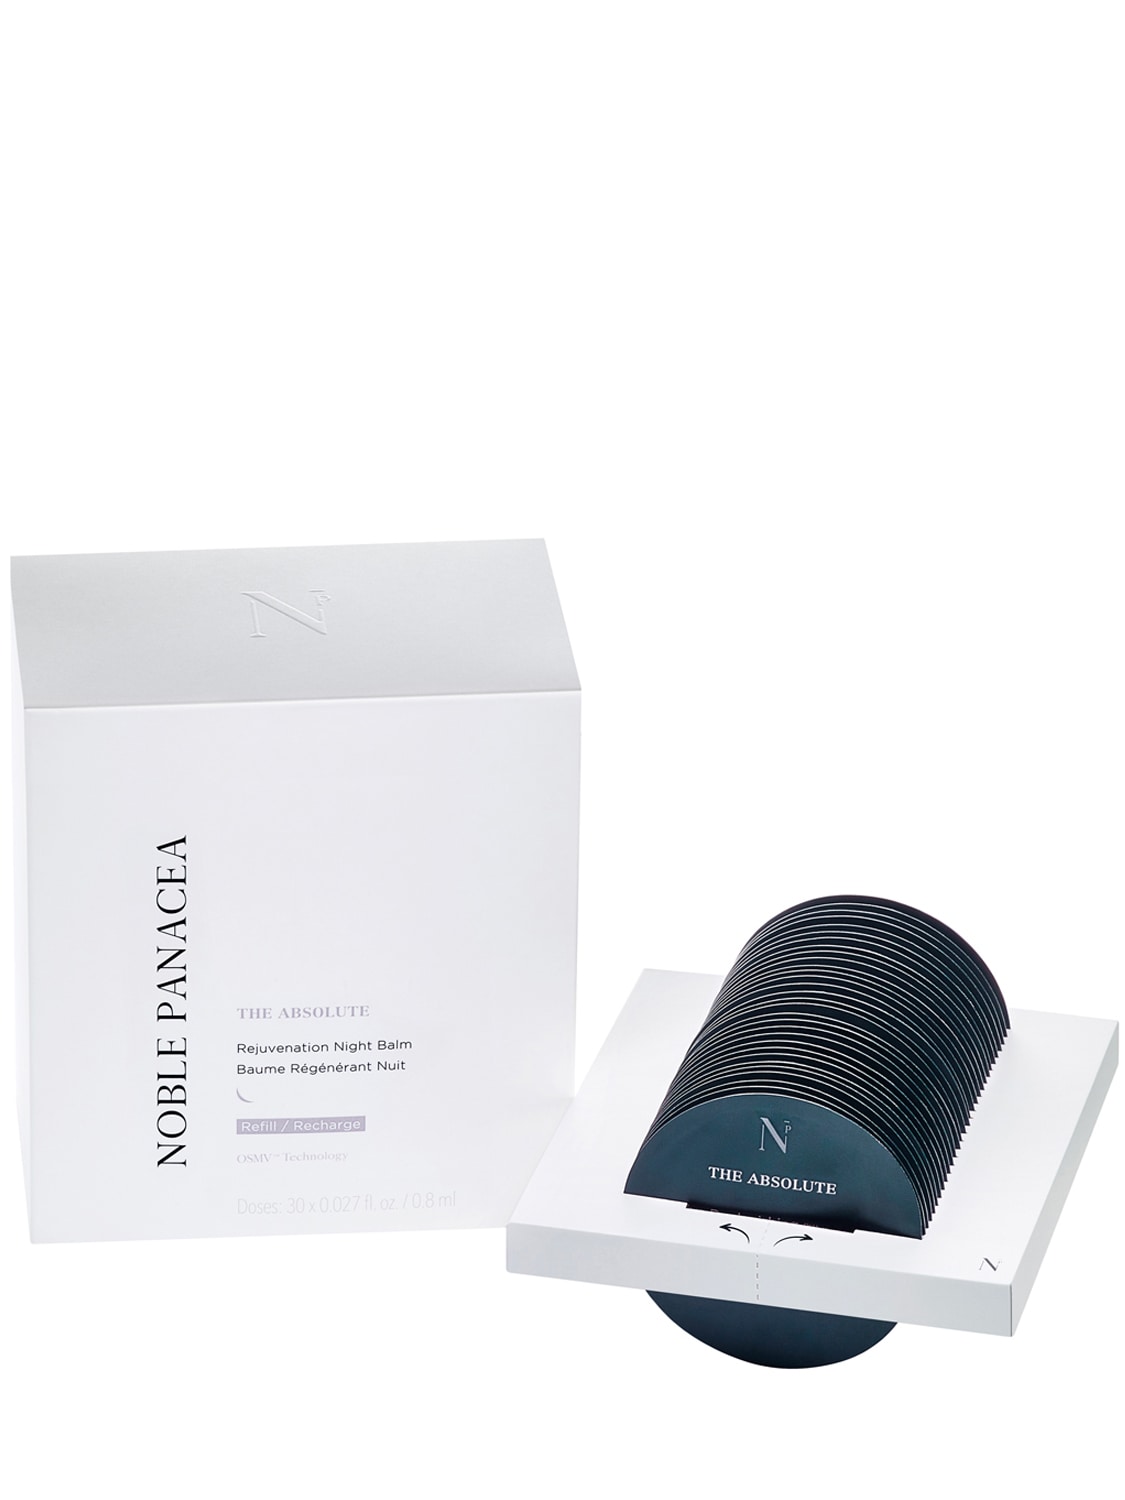 Image of Absolute Rejuvenation Night Balm Refill